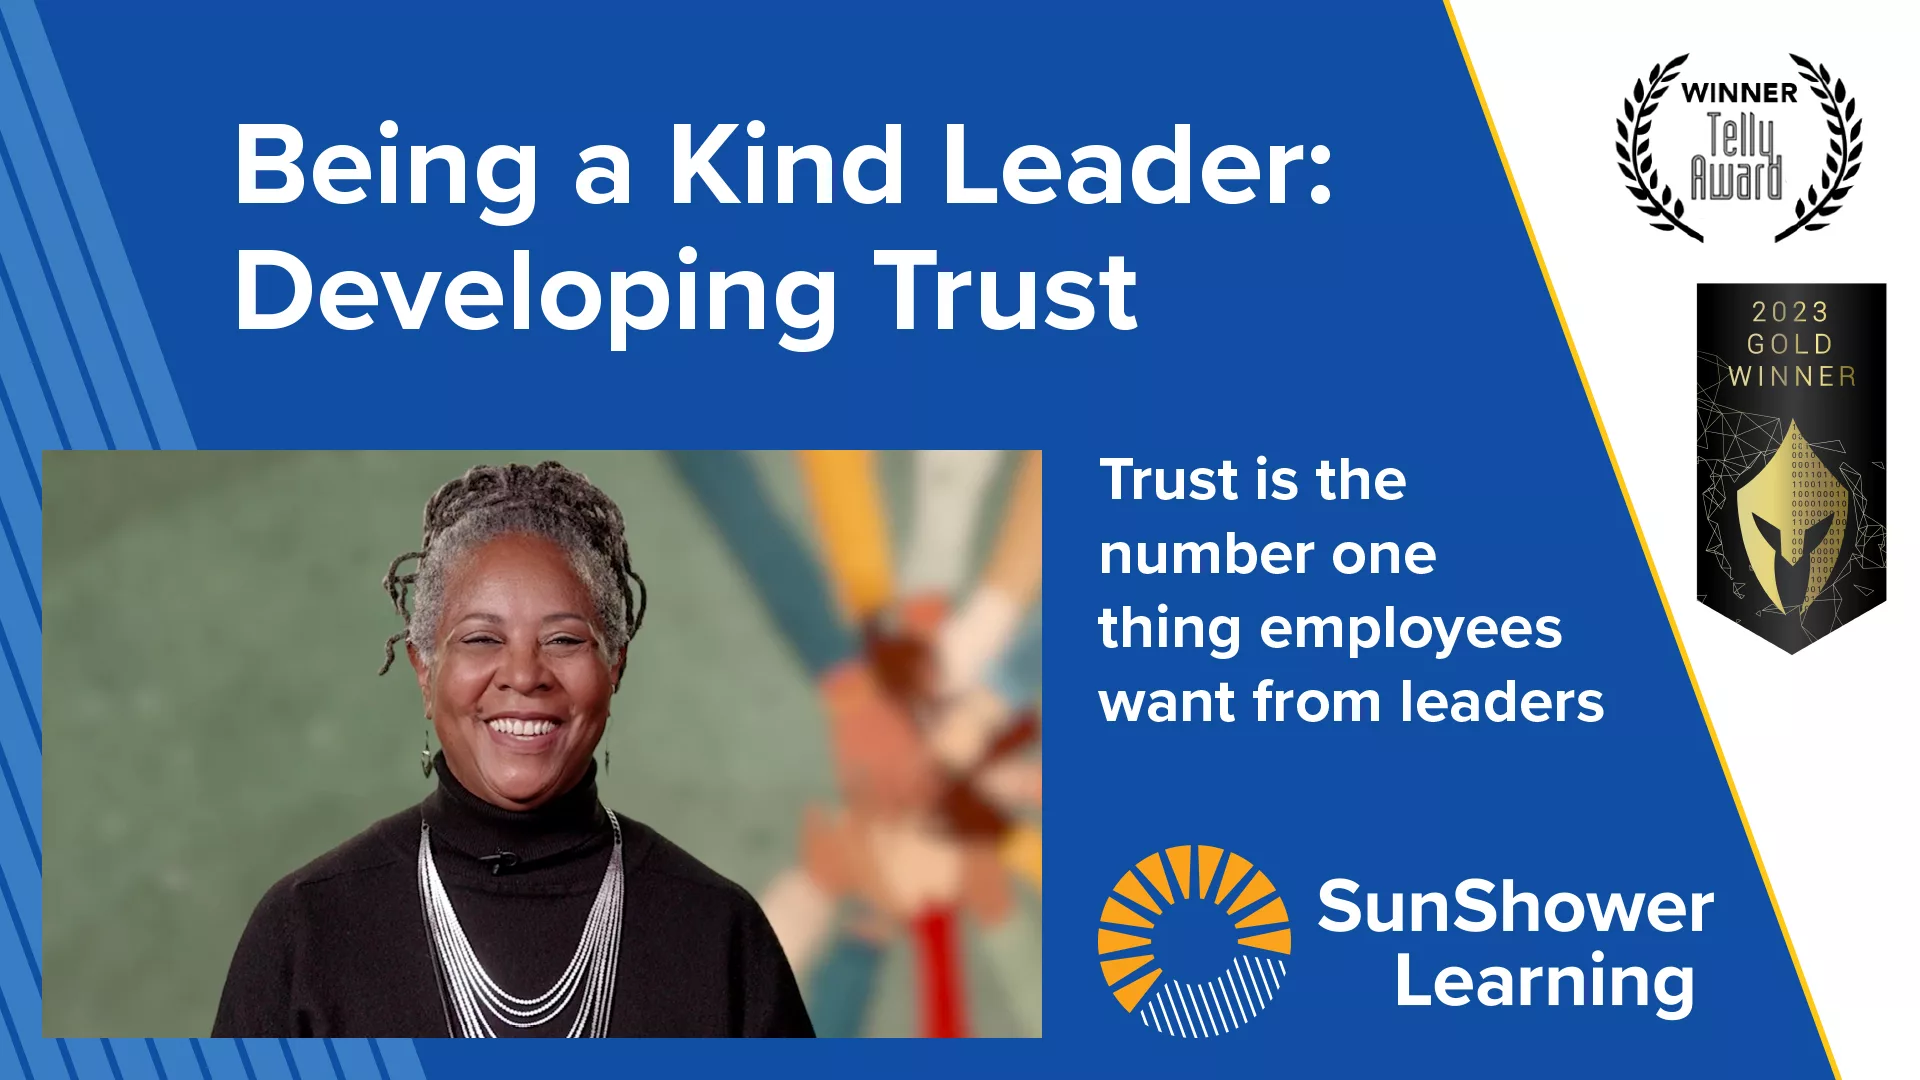 Thumbnail image with title, Being a Kind Leader: Developing Trust and text, Trust is the number one thing employees want from leaders. Telly award seal.